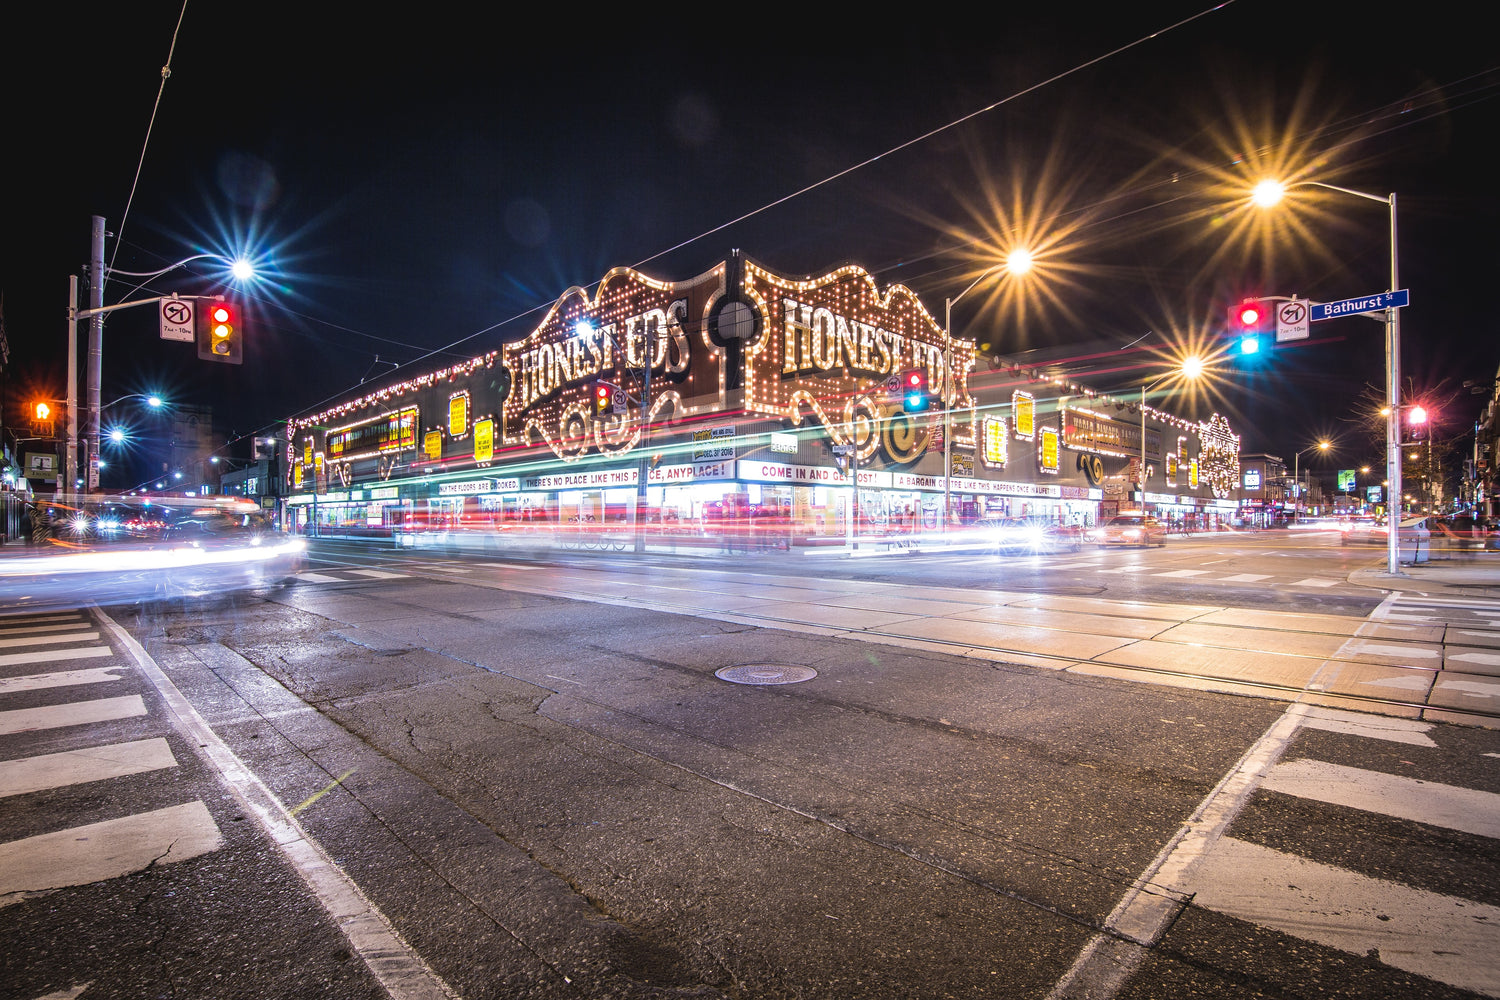  A bustling city intersection at night with the iconic, brightly lit Honest Ed's storefront. The long exposure captures the vibrant streaks of light from moving vehicles, against the static, illuminated signage, creating a lively urban atmosphere. Street signs and traffic lights add to the urban detail of the scene.